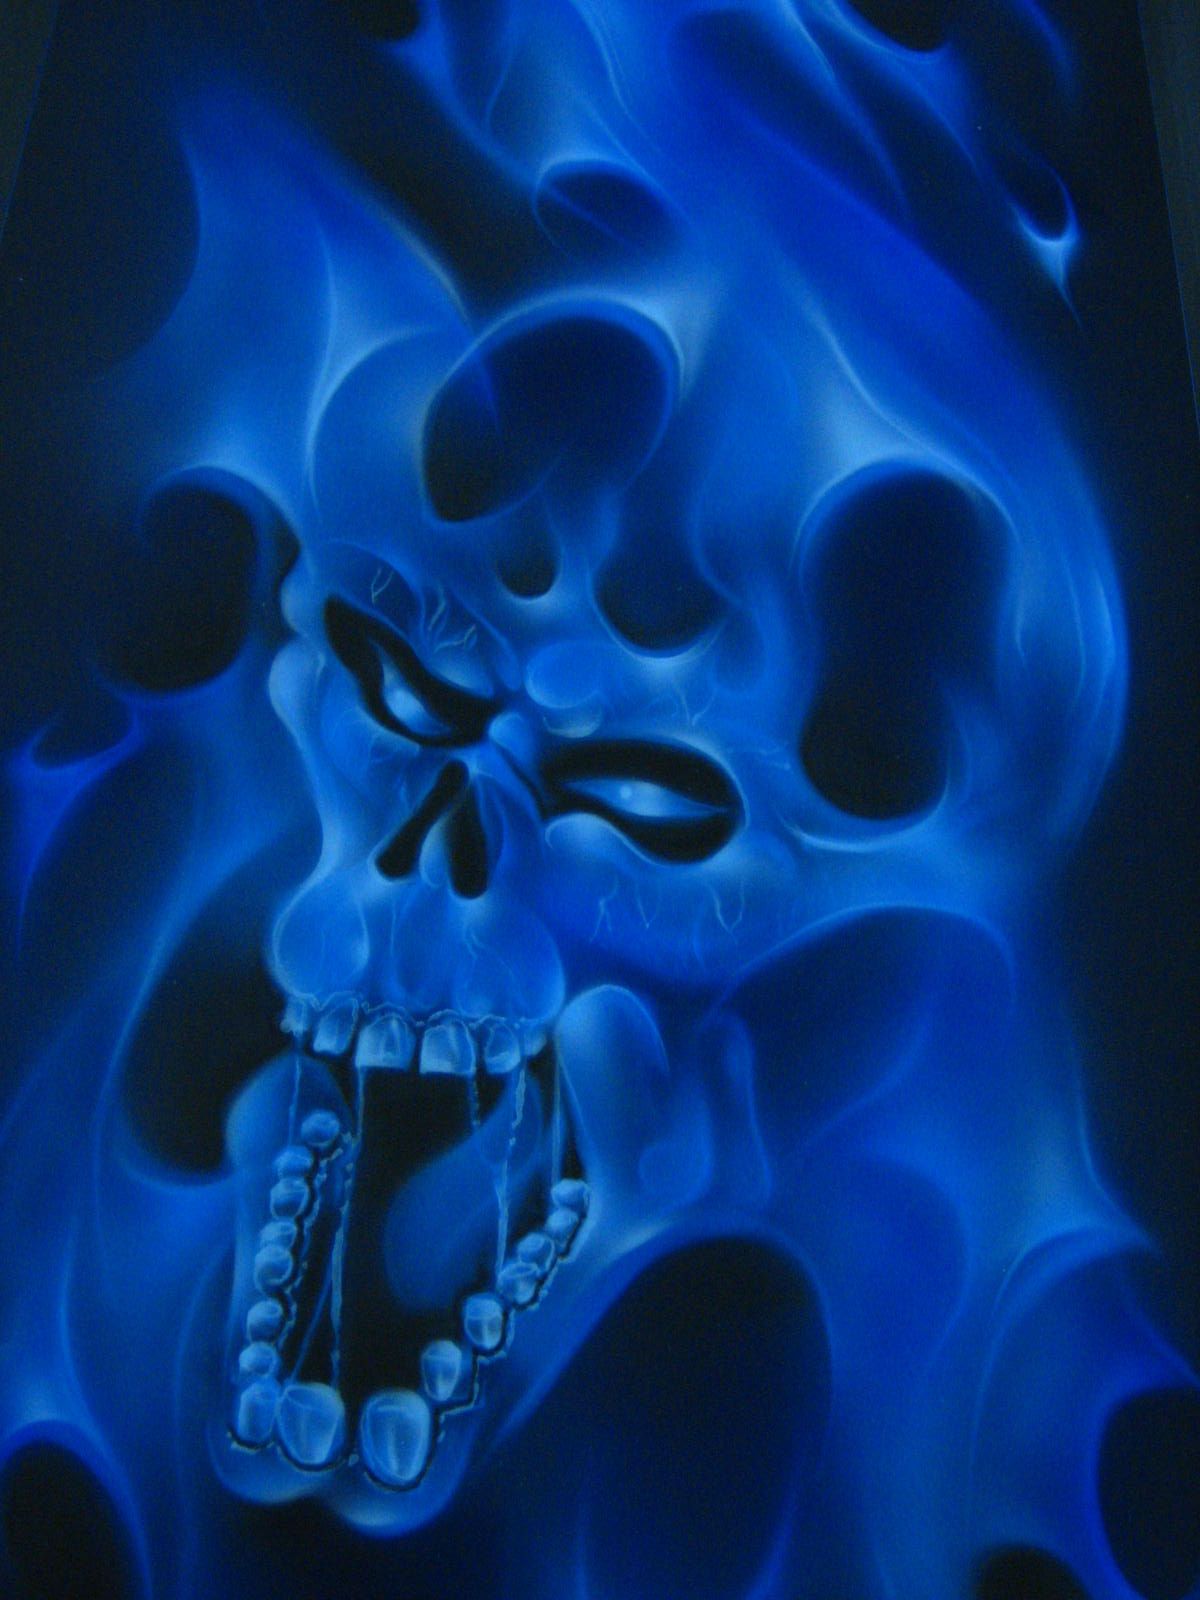 Skeletons With Blue Flames - HD Wallpaper 